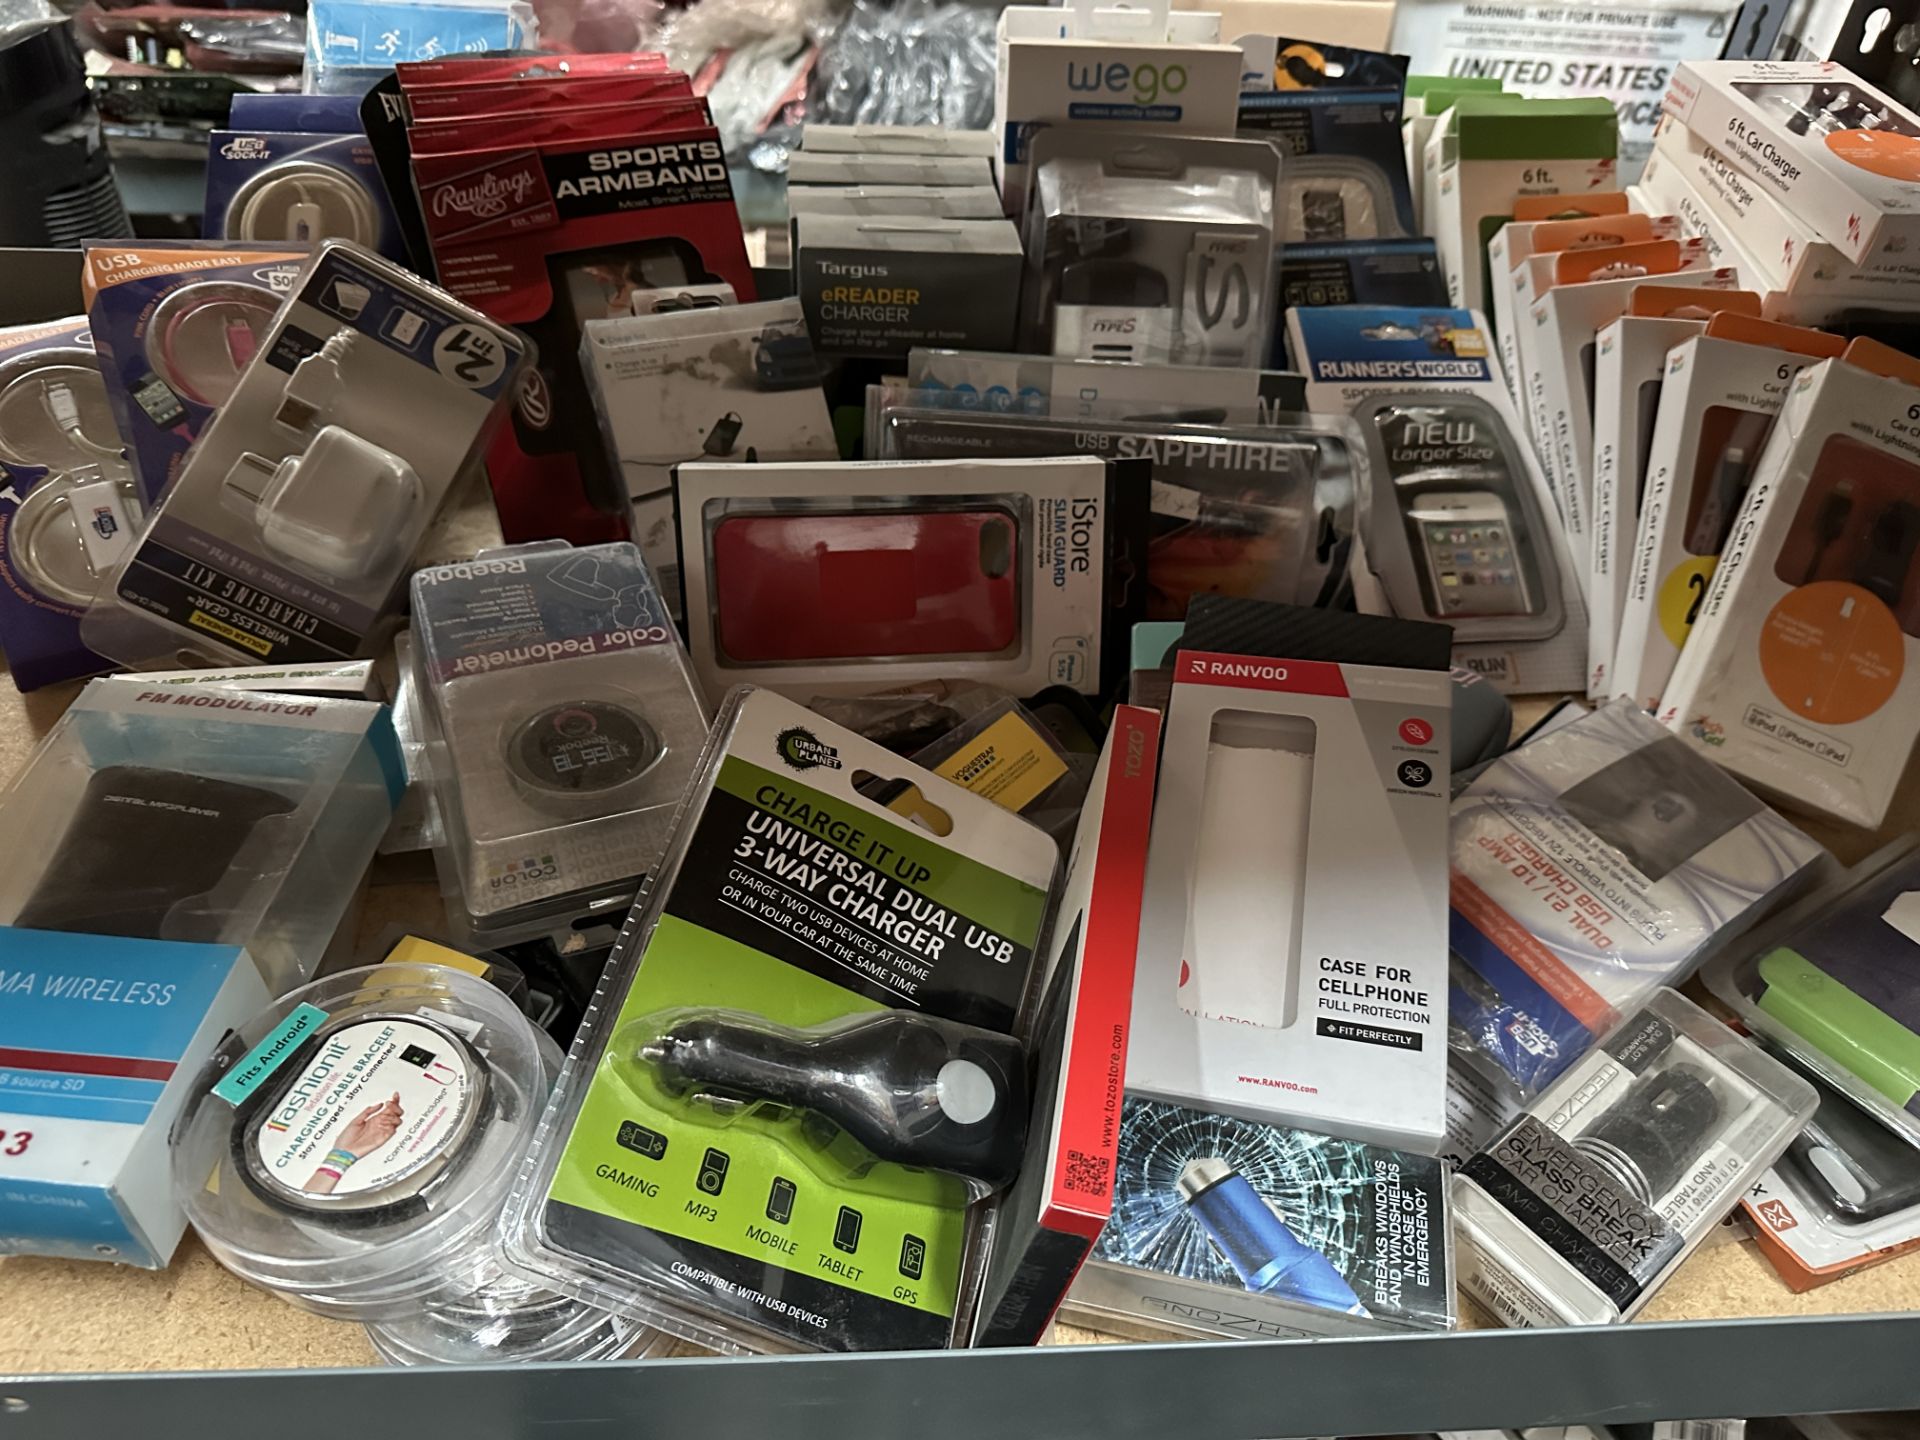 Mixed Lot of Electronics Accessories, Phone Cases, Etc, ARA15 - Image 5 of 6